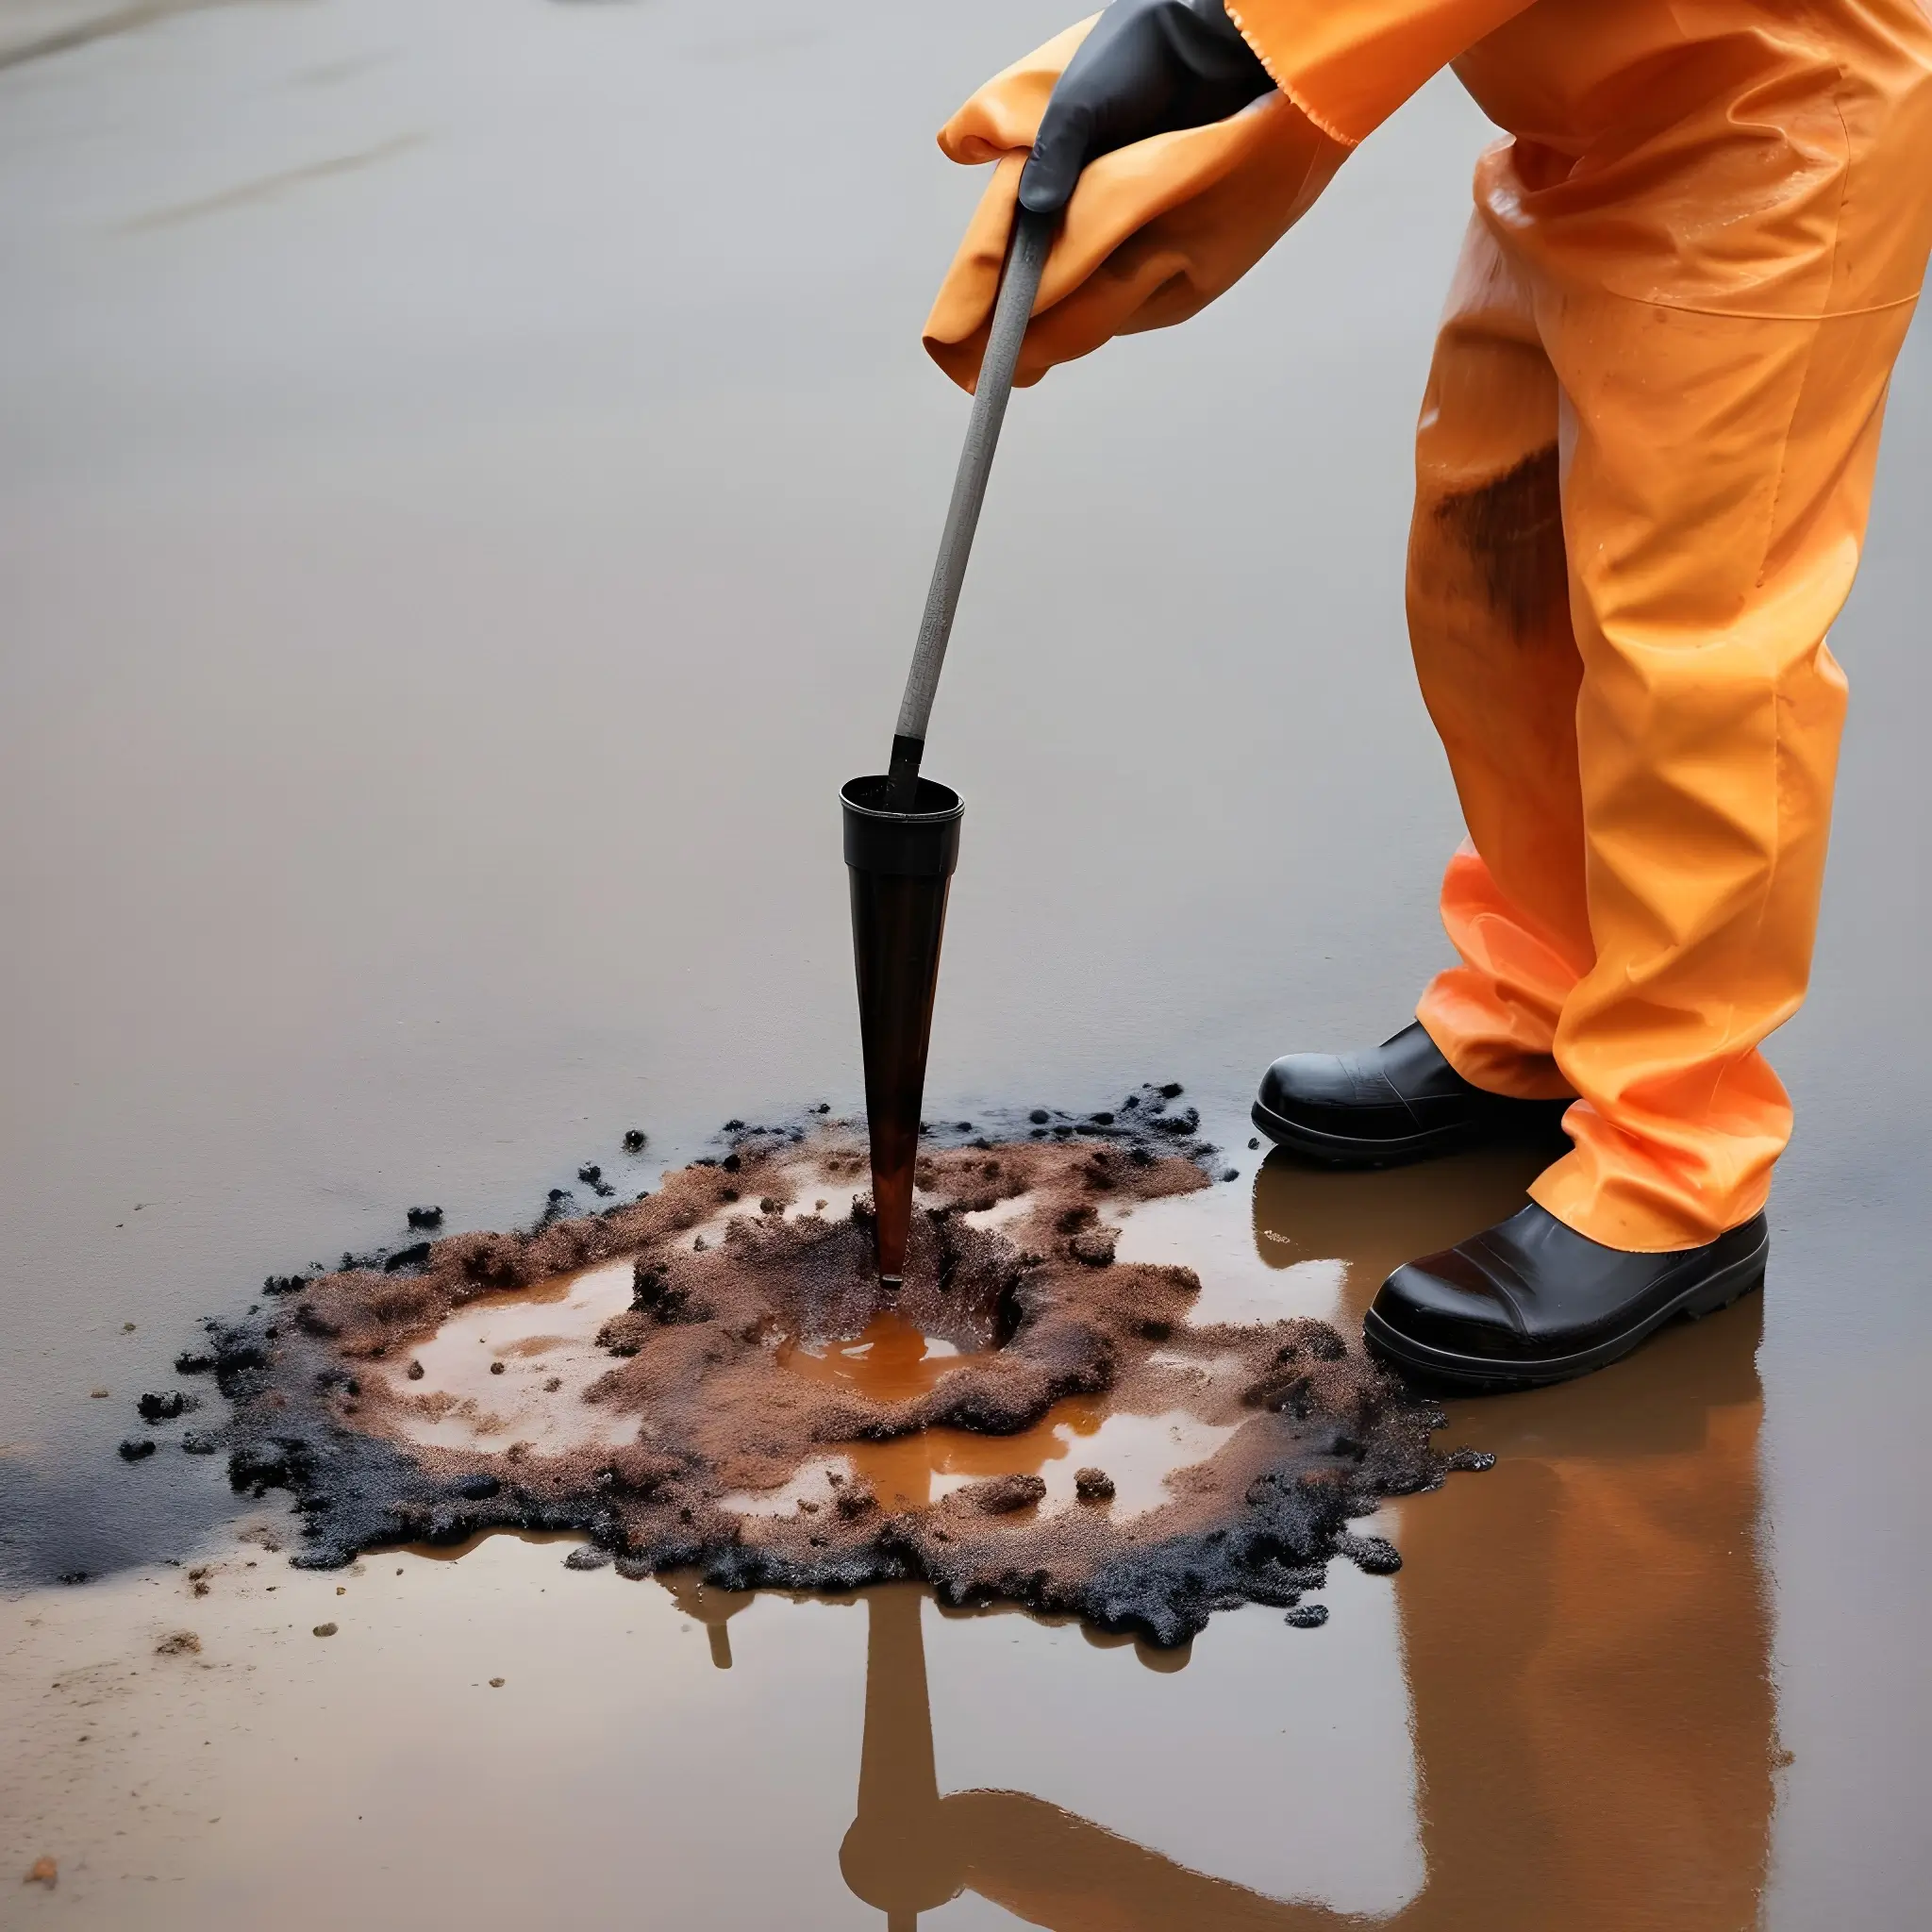 How to Clean up Oil Spills on Concrete?